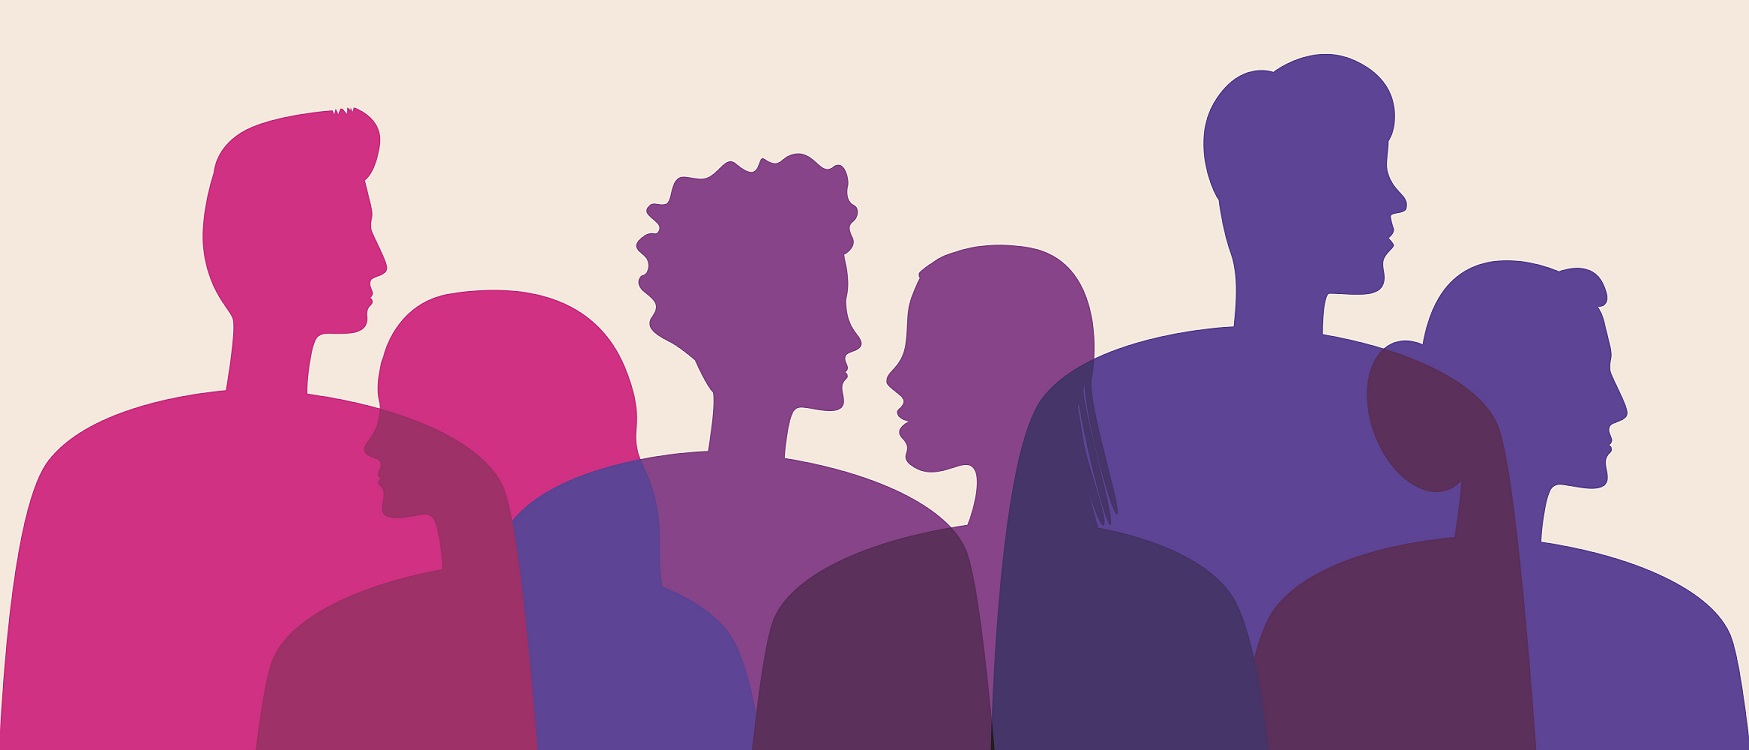 Bisexual people in the color of the bisexual flag. Silhouette vector stock illustration. Bisexuals as a community of LGBTQ, bisexualism. People's faces in profile. Isolated illustration